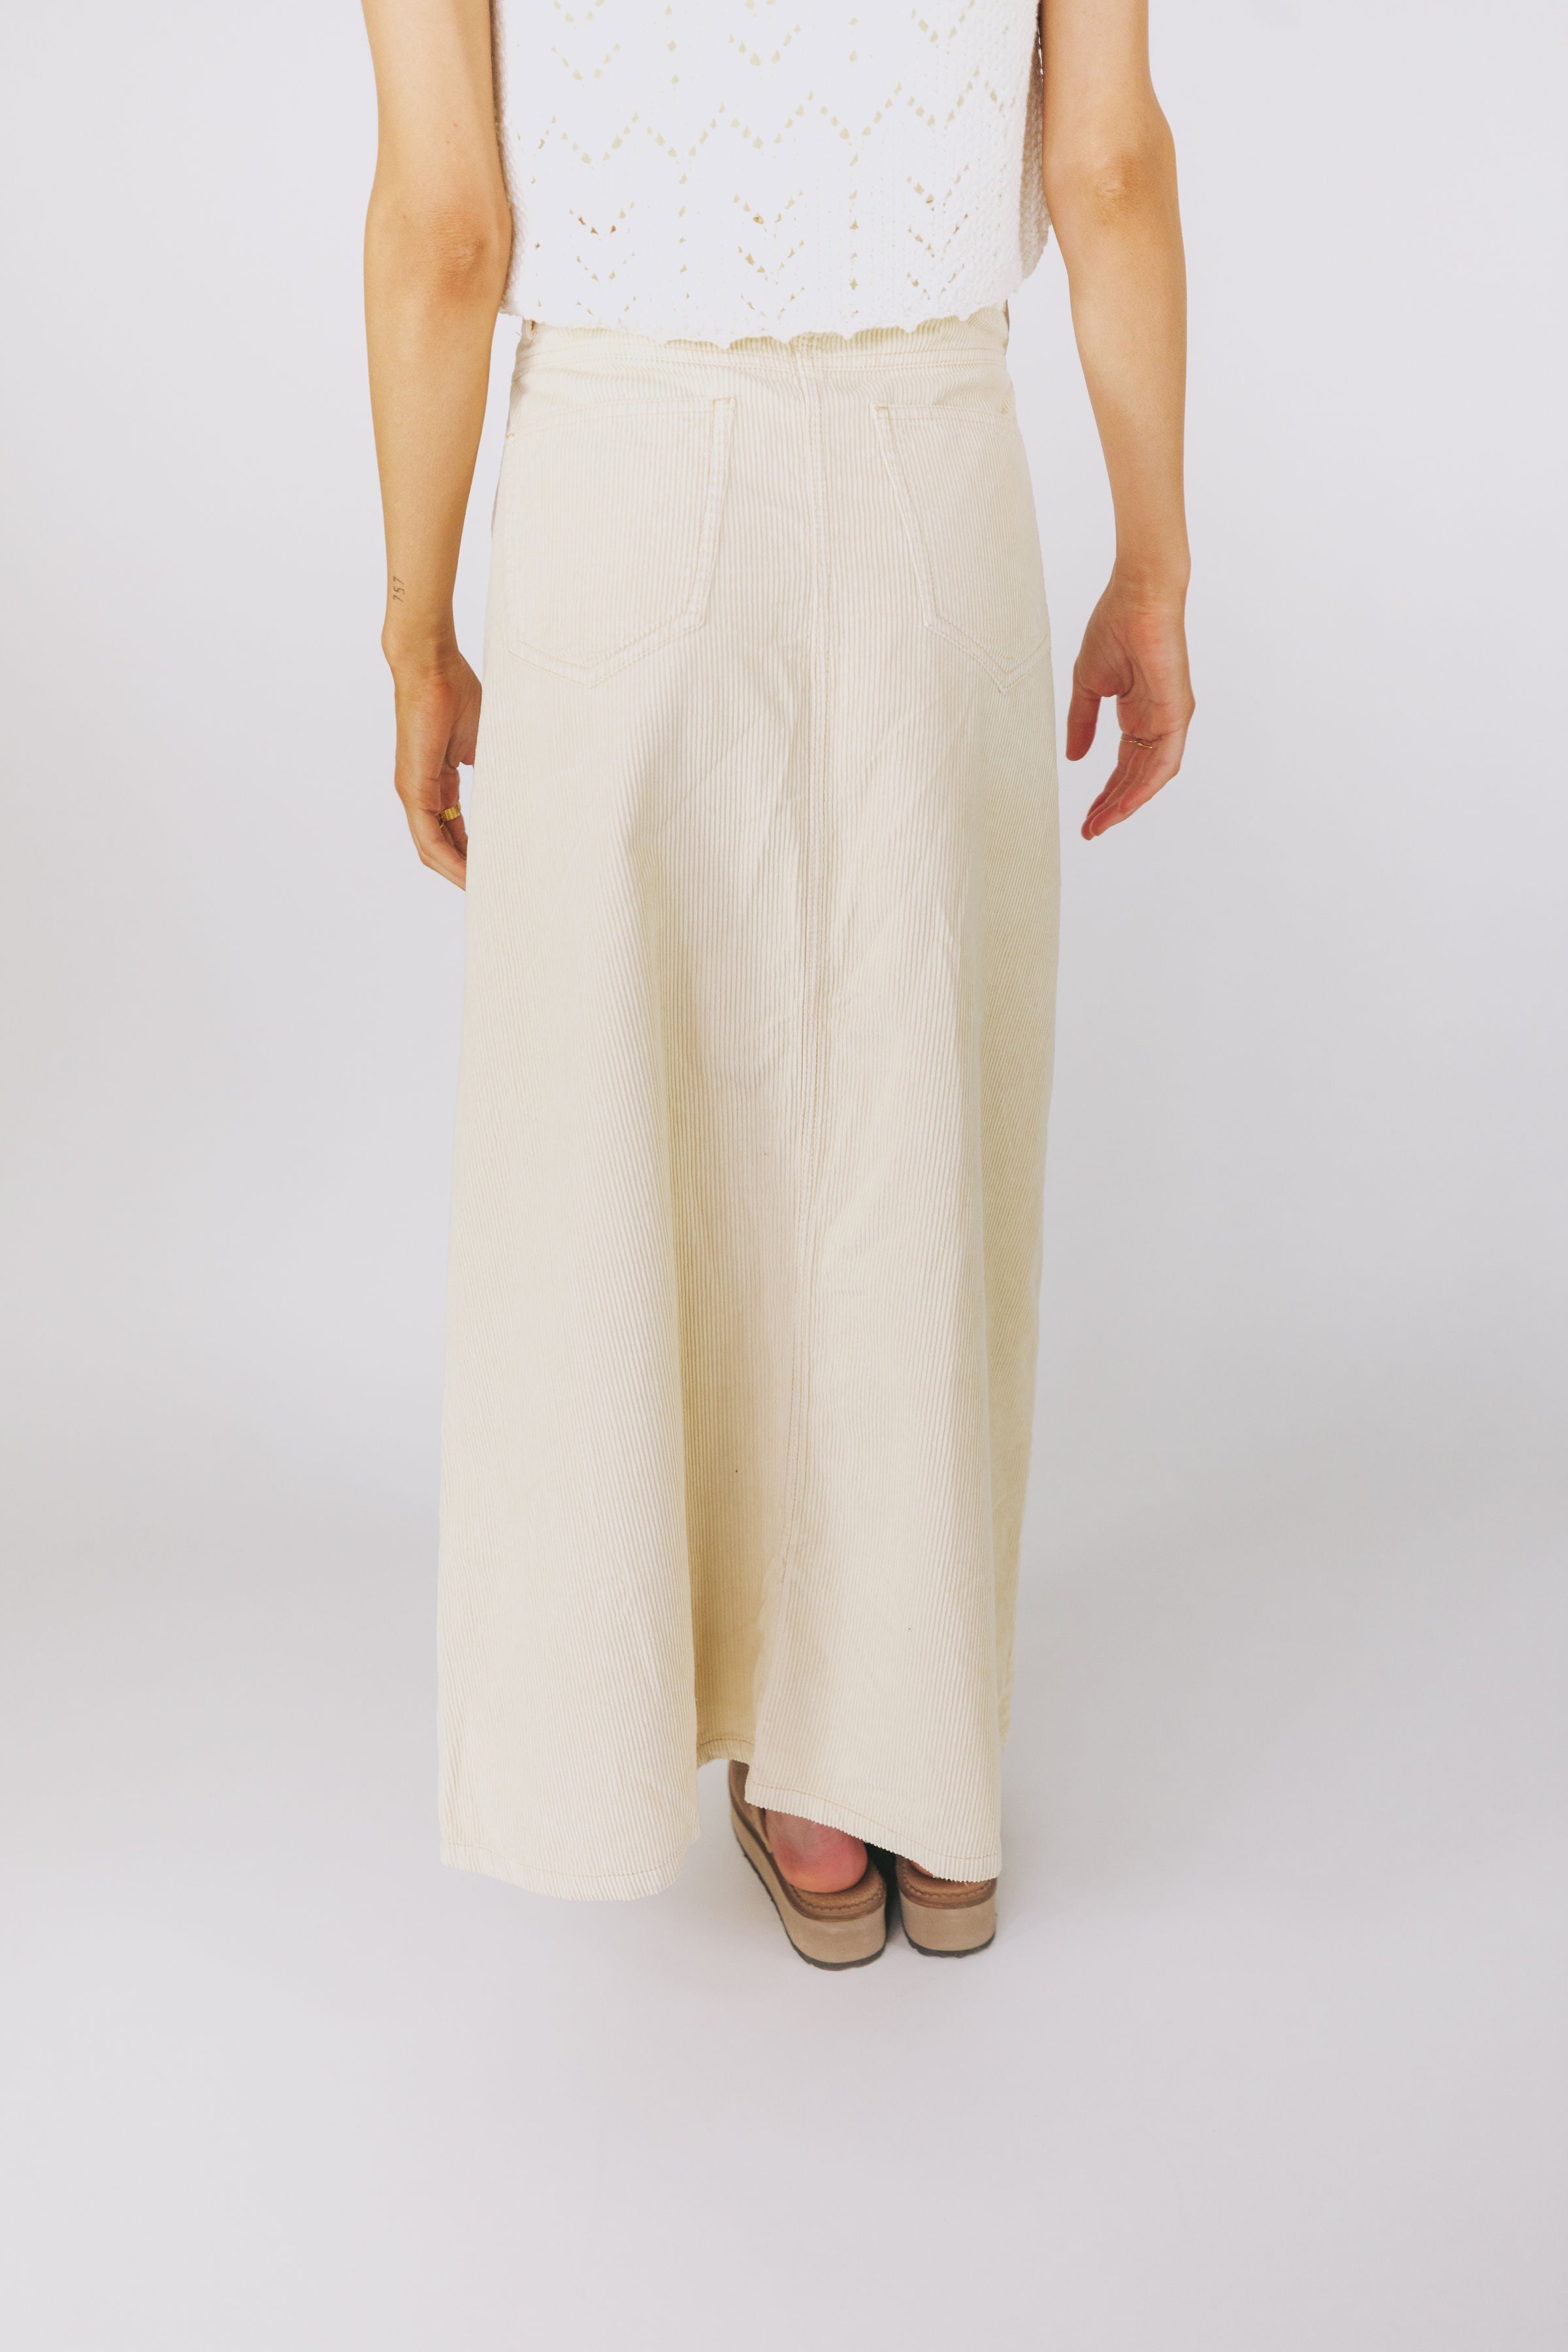 FREE PEOPLE - Come As You Are Cord Maxi Skirt